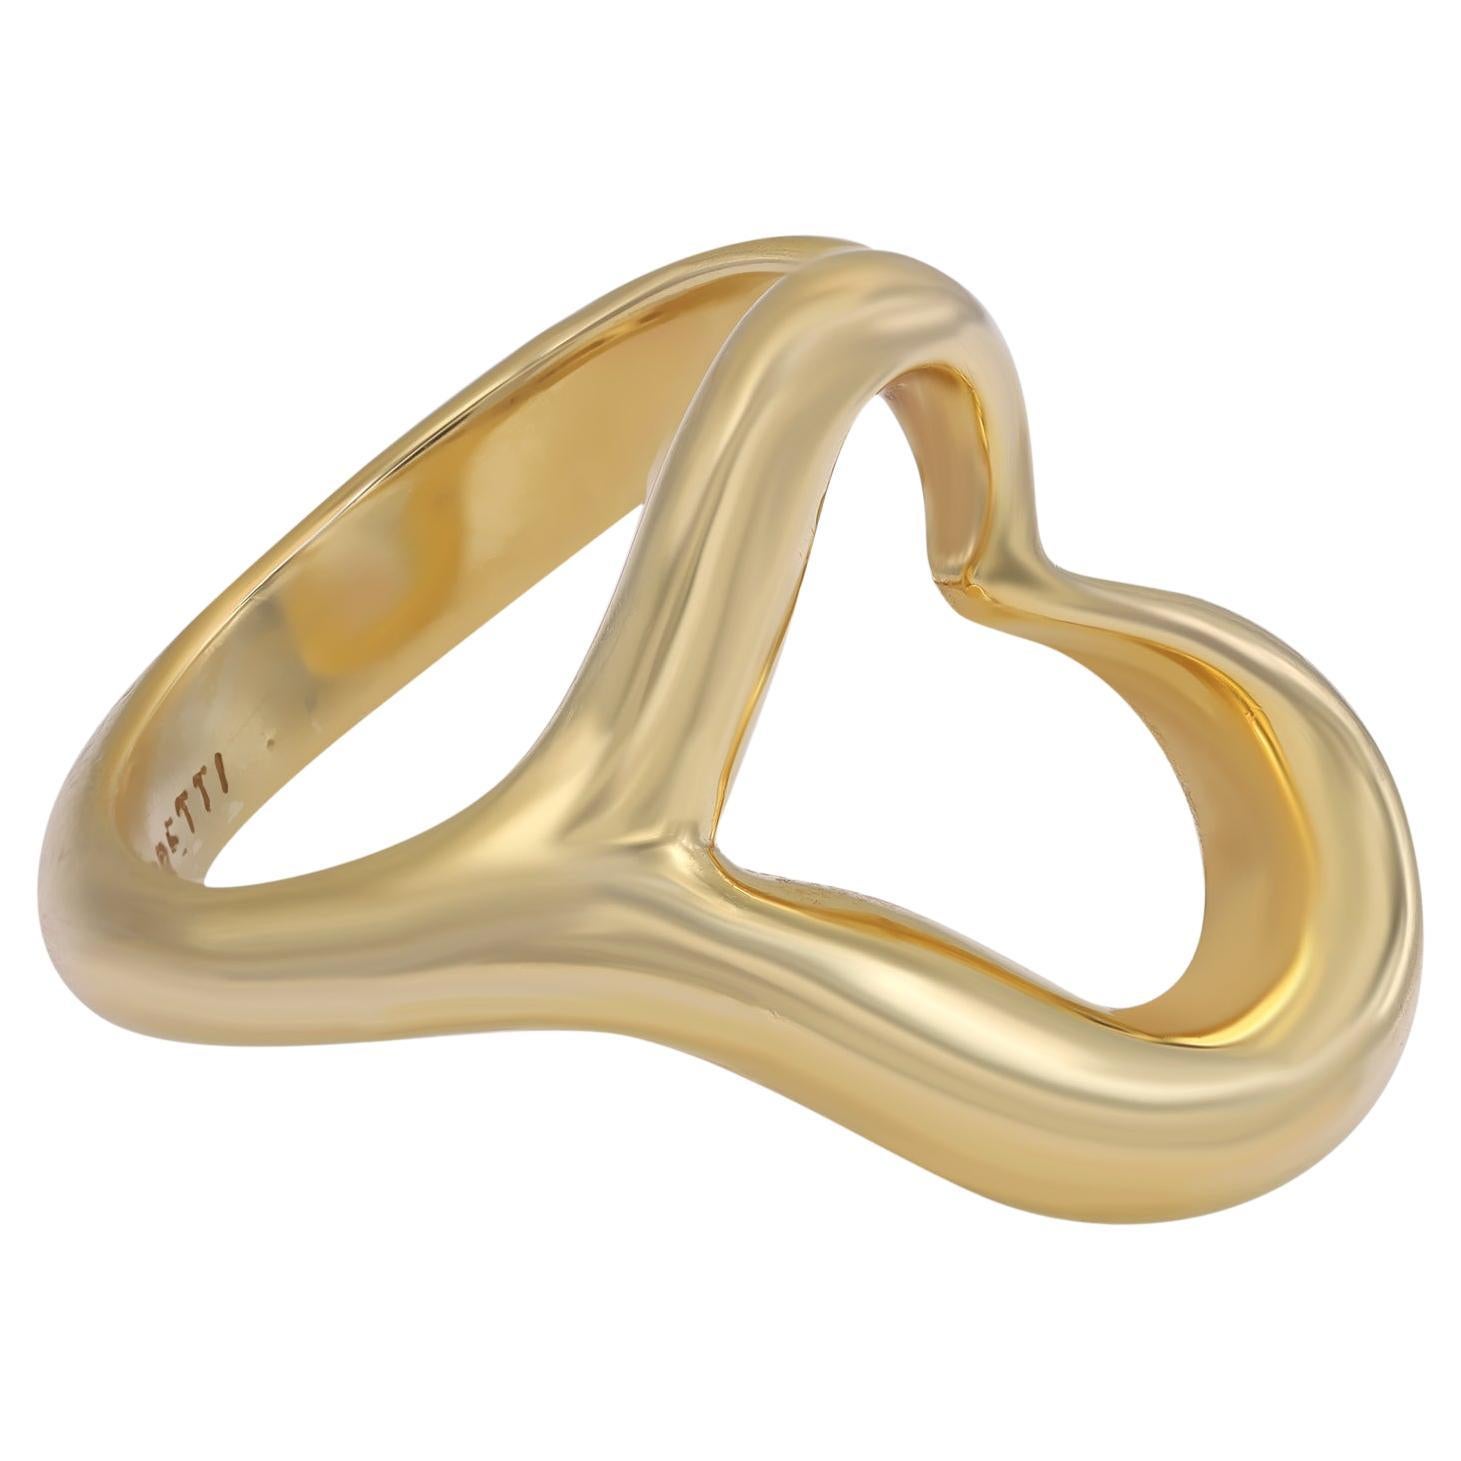 Tiffiany & Co. Elsa Peretti Open Heart ring celebrates the spirit of love. This simple and fluid ring is a timeless and elegant design. Crafted in 18k yellow gold. Ring size: 5. Total ring weight: 9.70 grams. Excellent pre-owned condition. Original